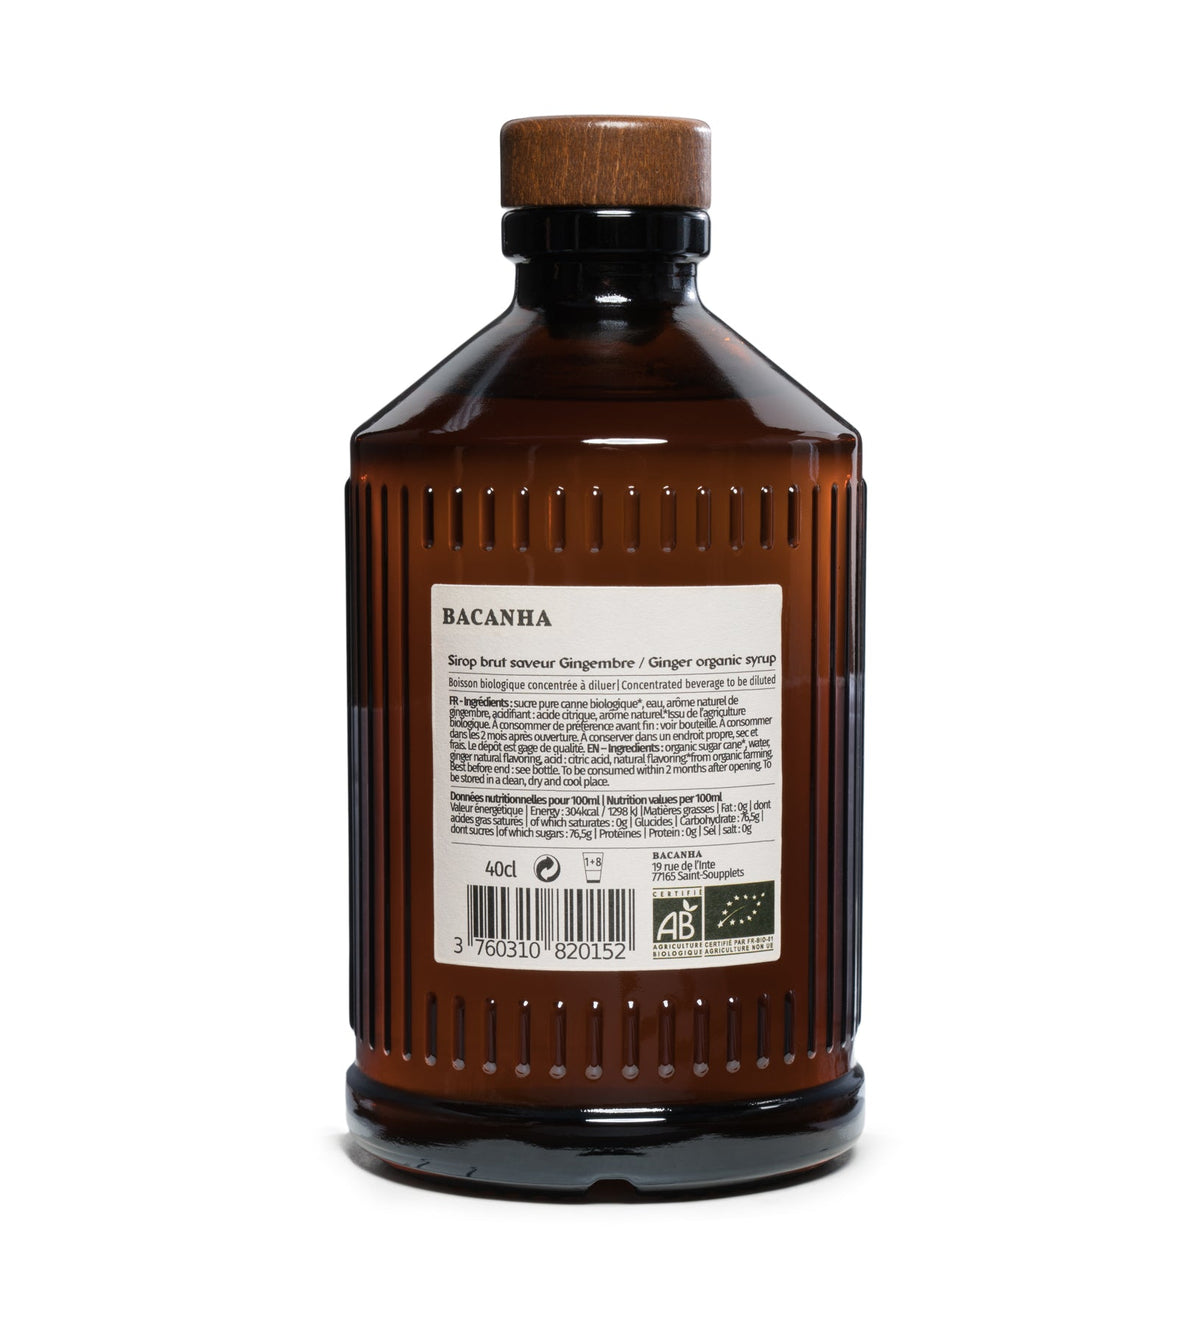 &lt;tc&gt;Bacanha Ginger flavored syrup [ORGANIC]&lt;/tc&gt;